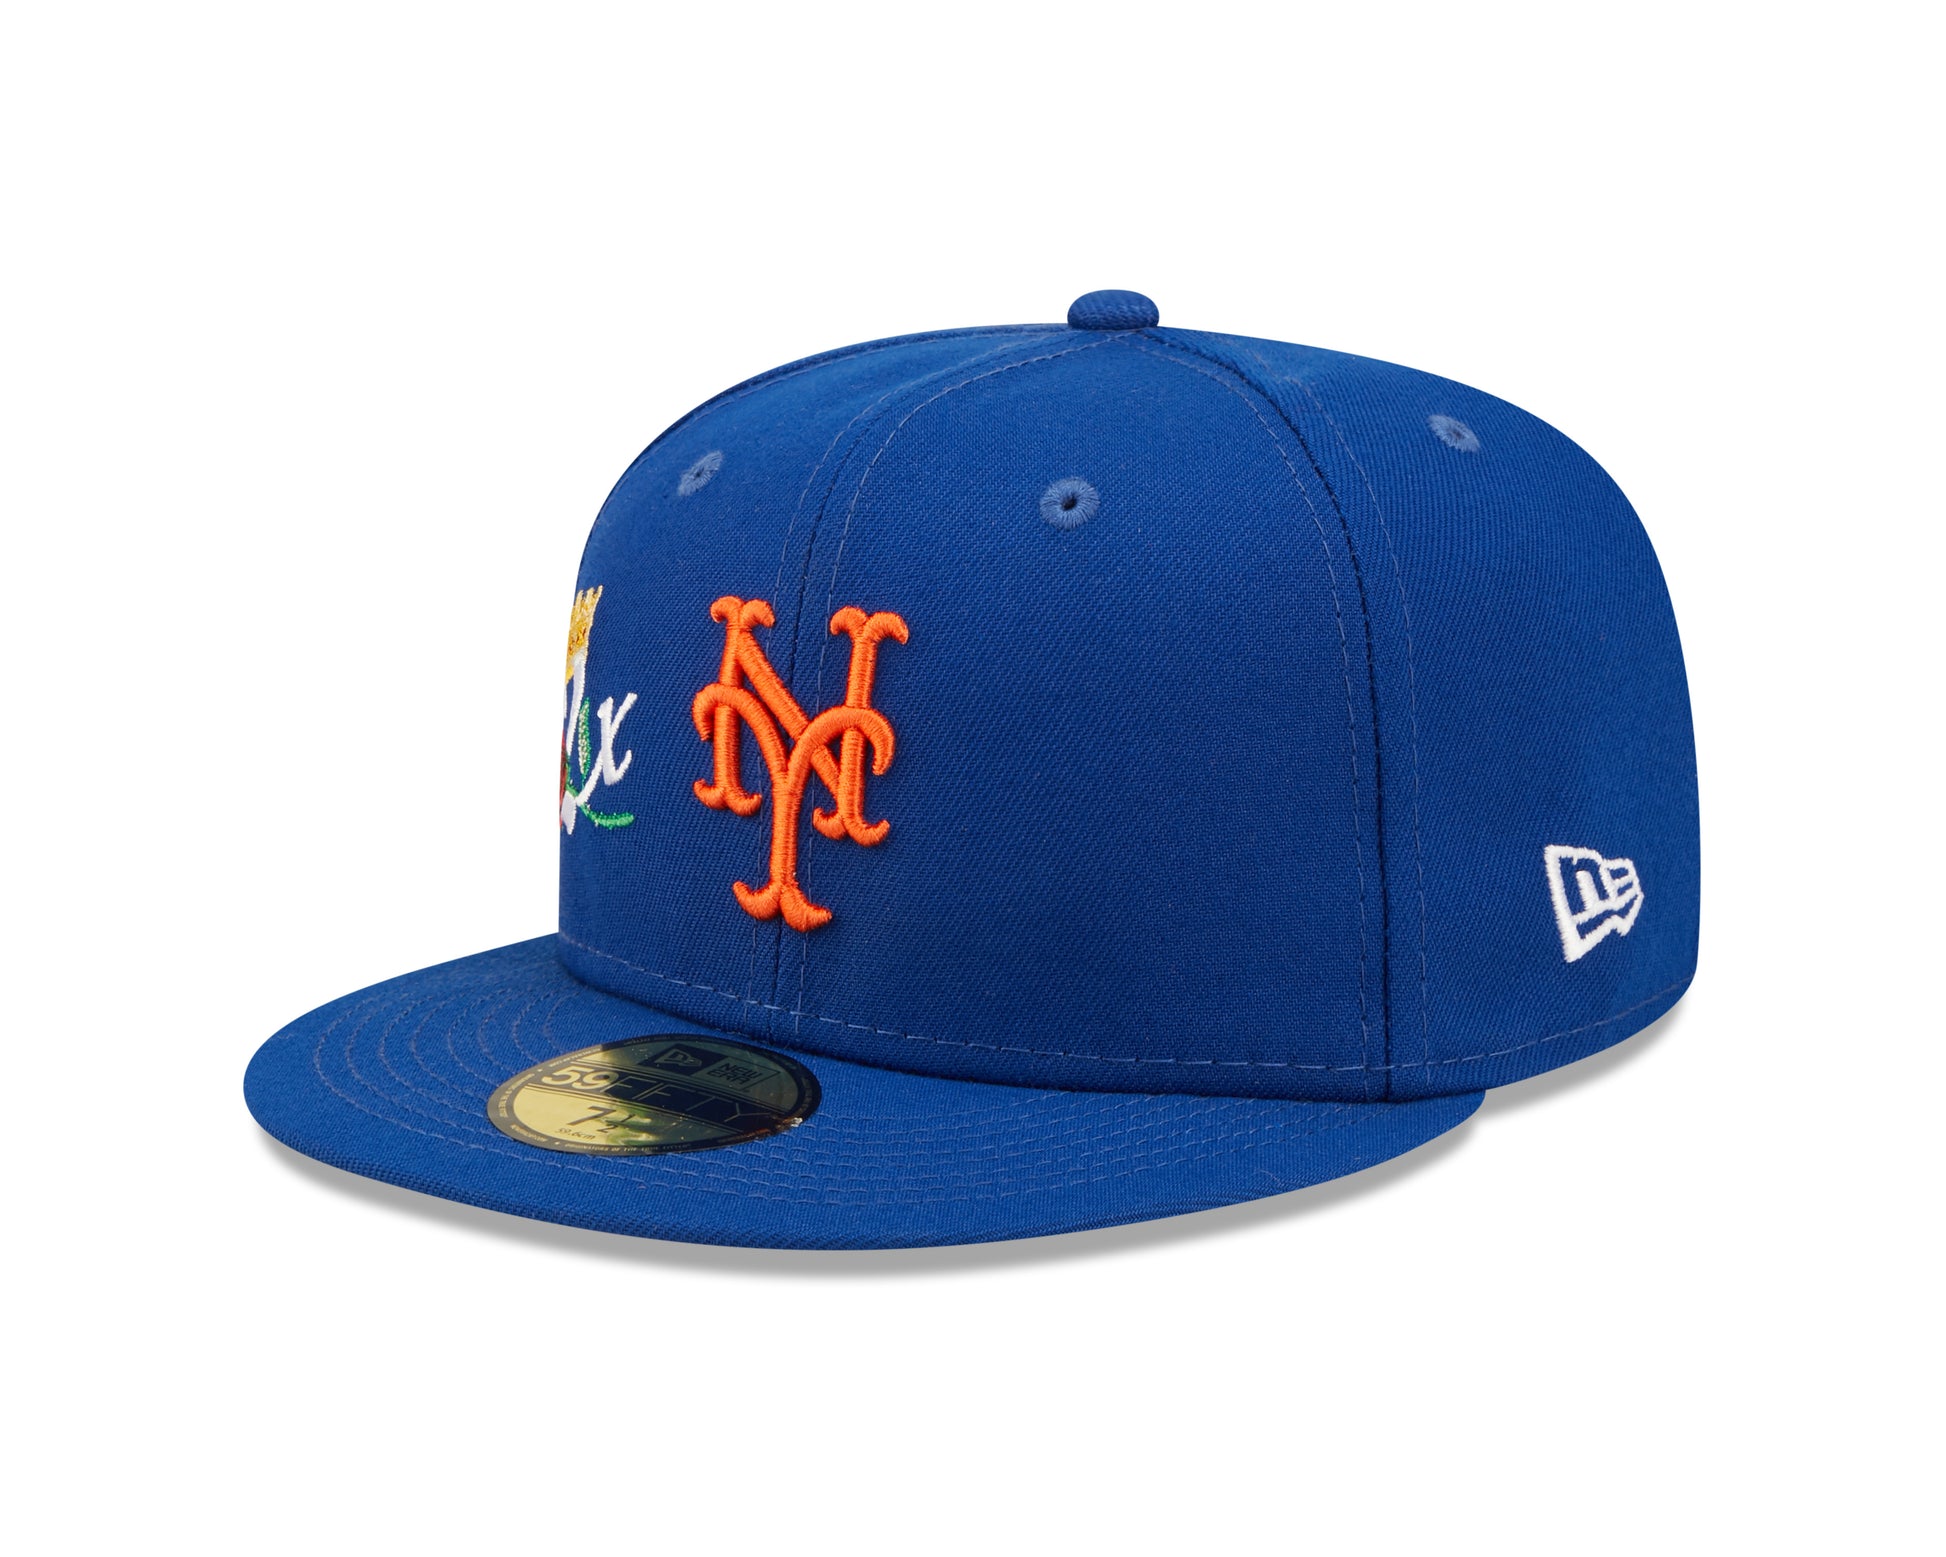 New York Mets CROWN CHAMPS 59Fifty Fitted Cap - OTC - Headz Up 